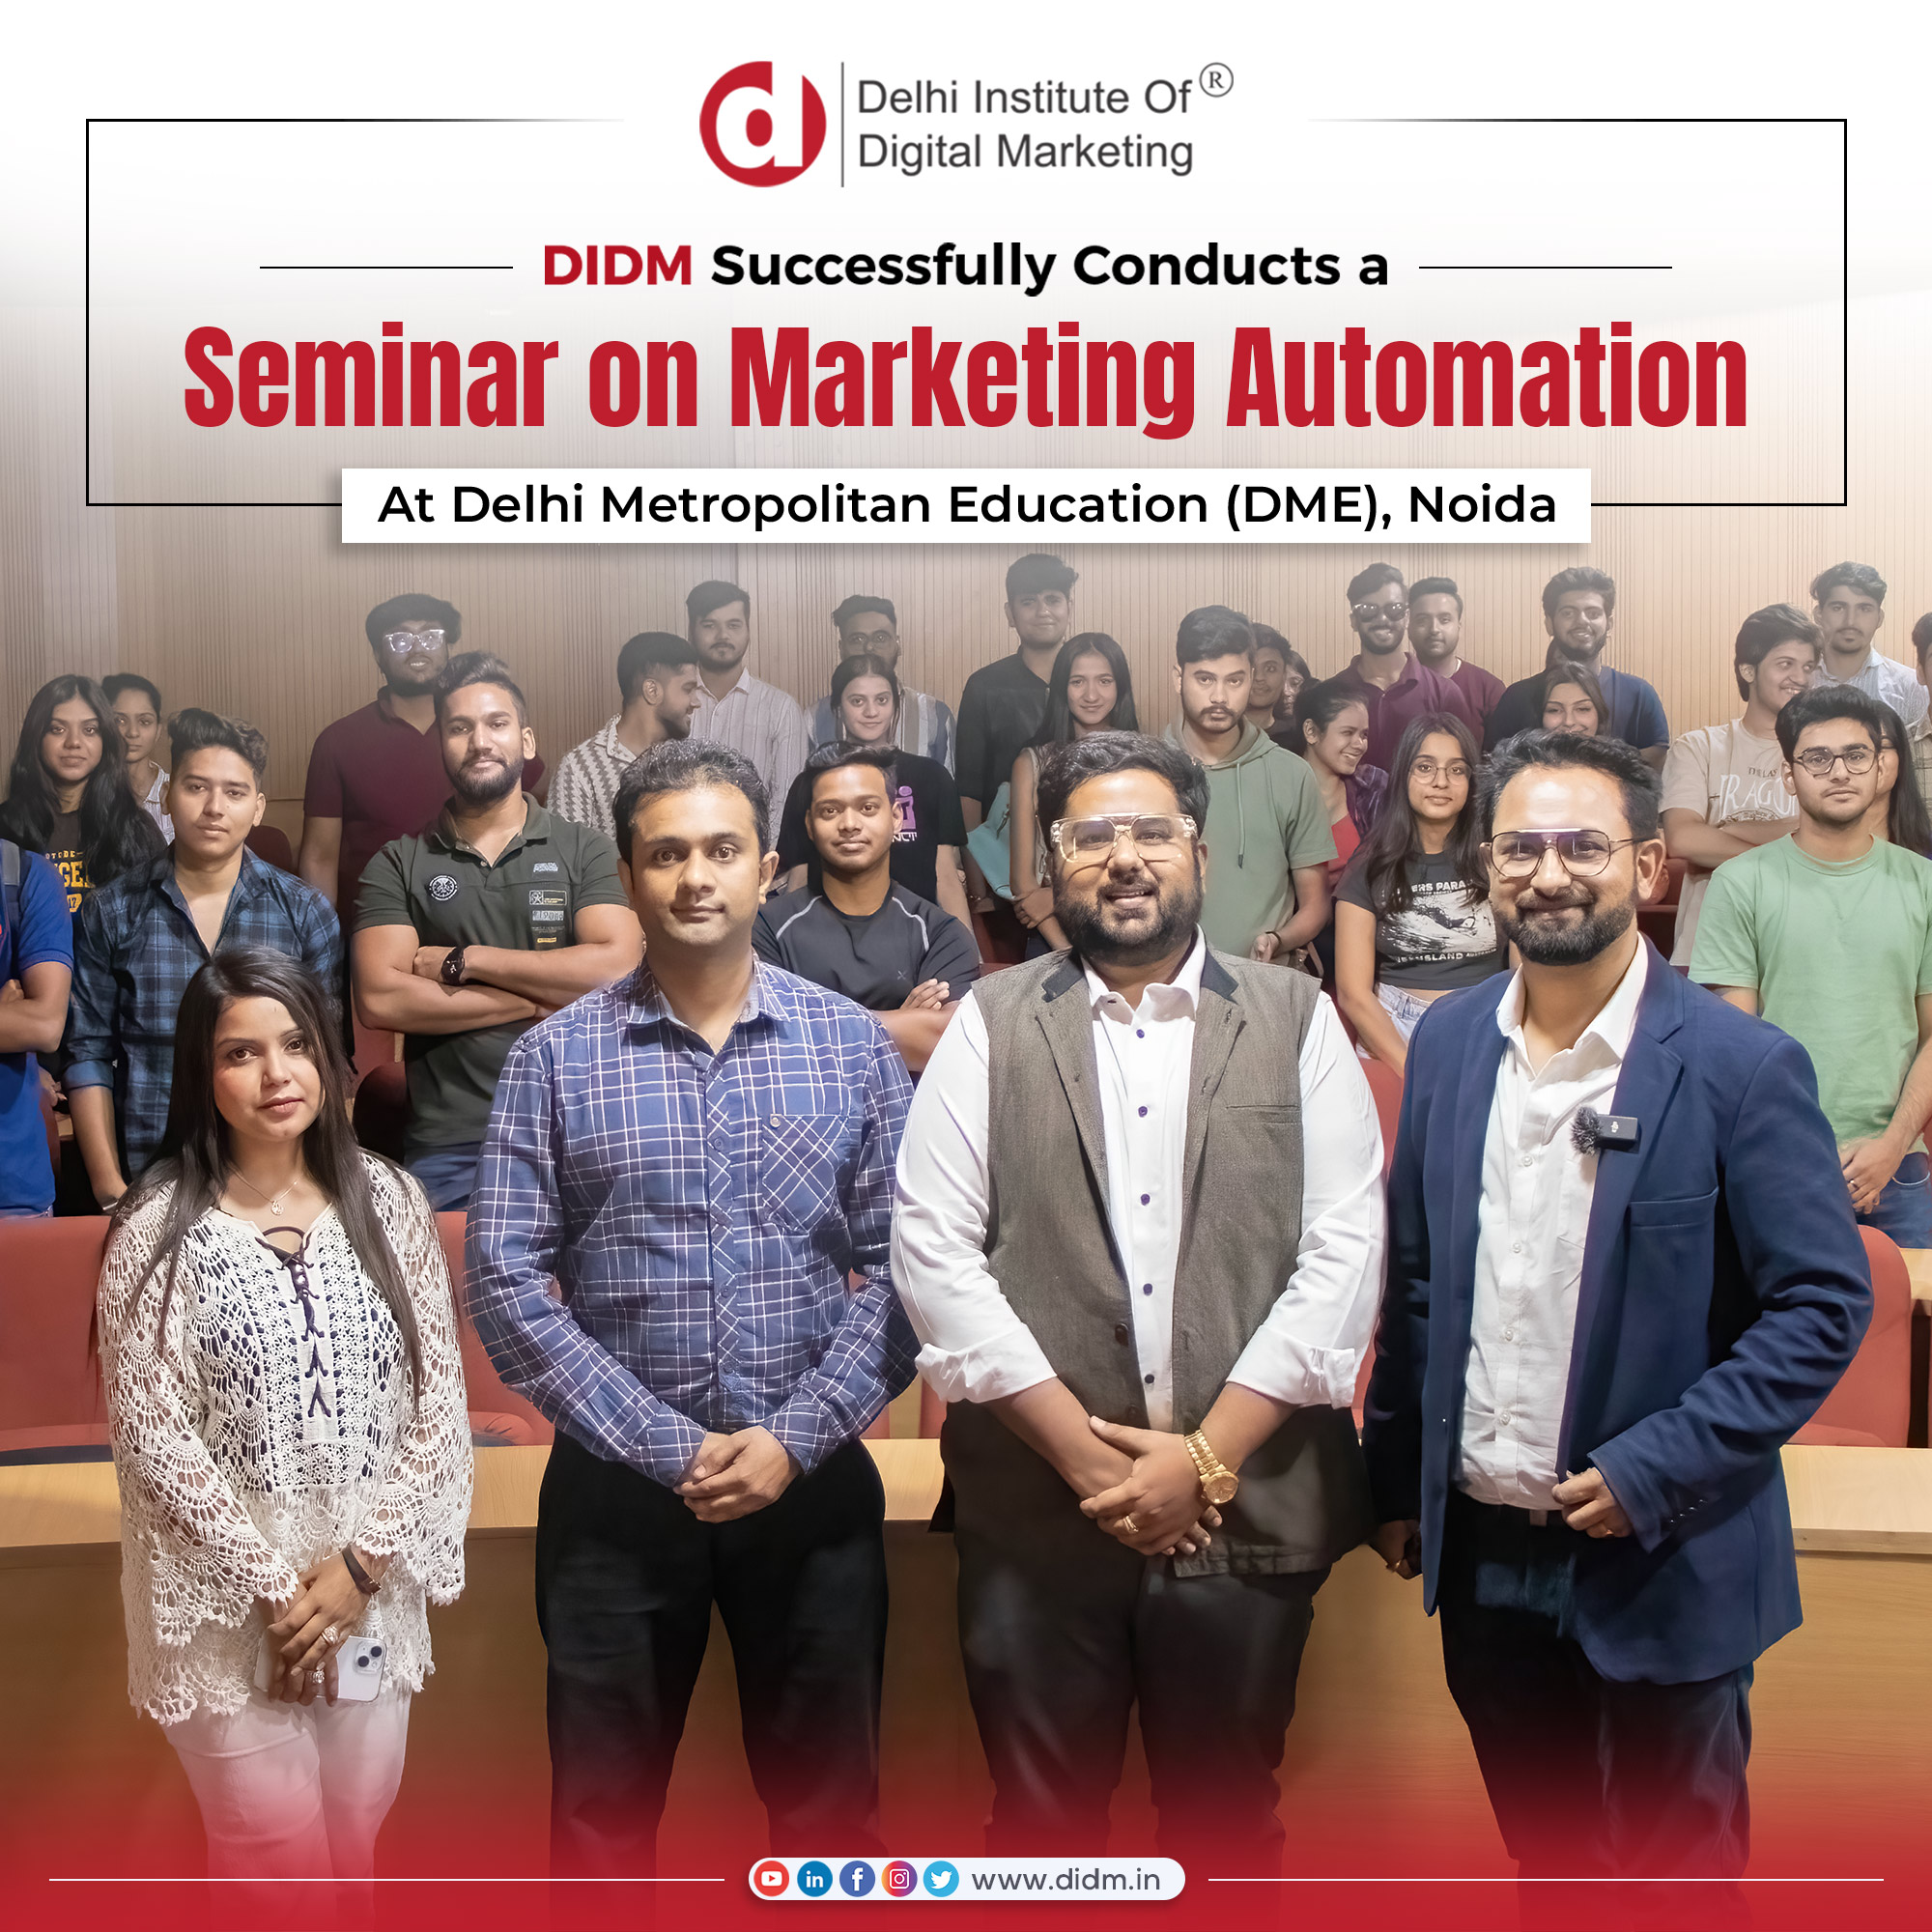 DIDM Successfully Conducts a Seminar on Marketing Automation at DME, Noida